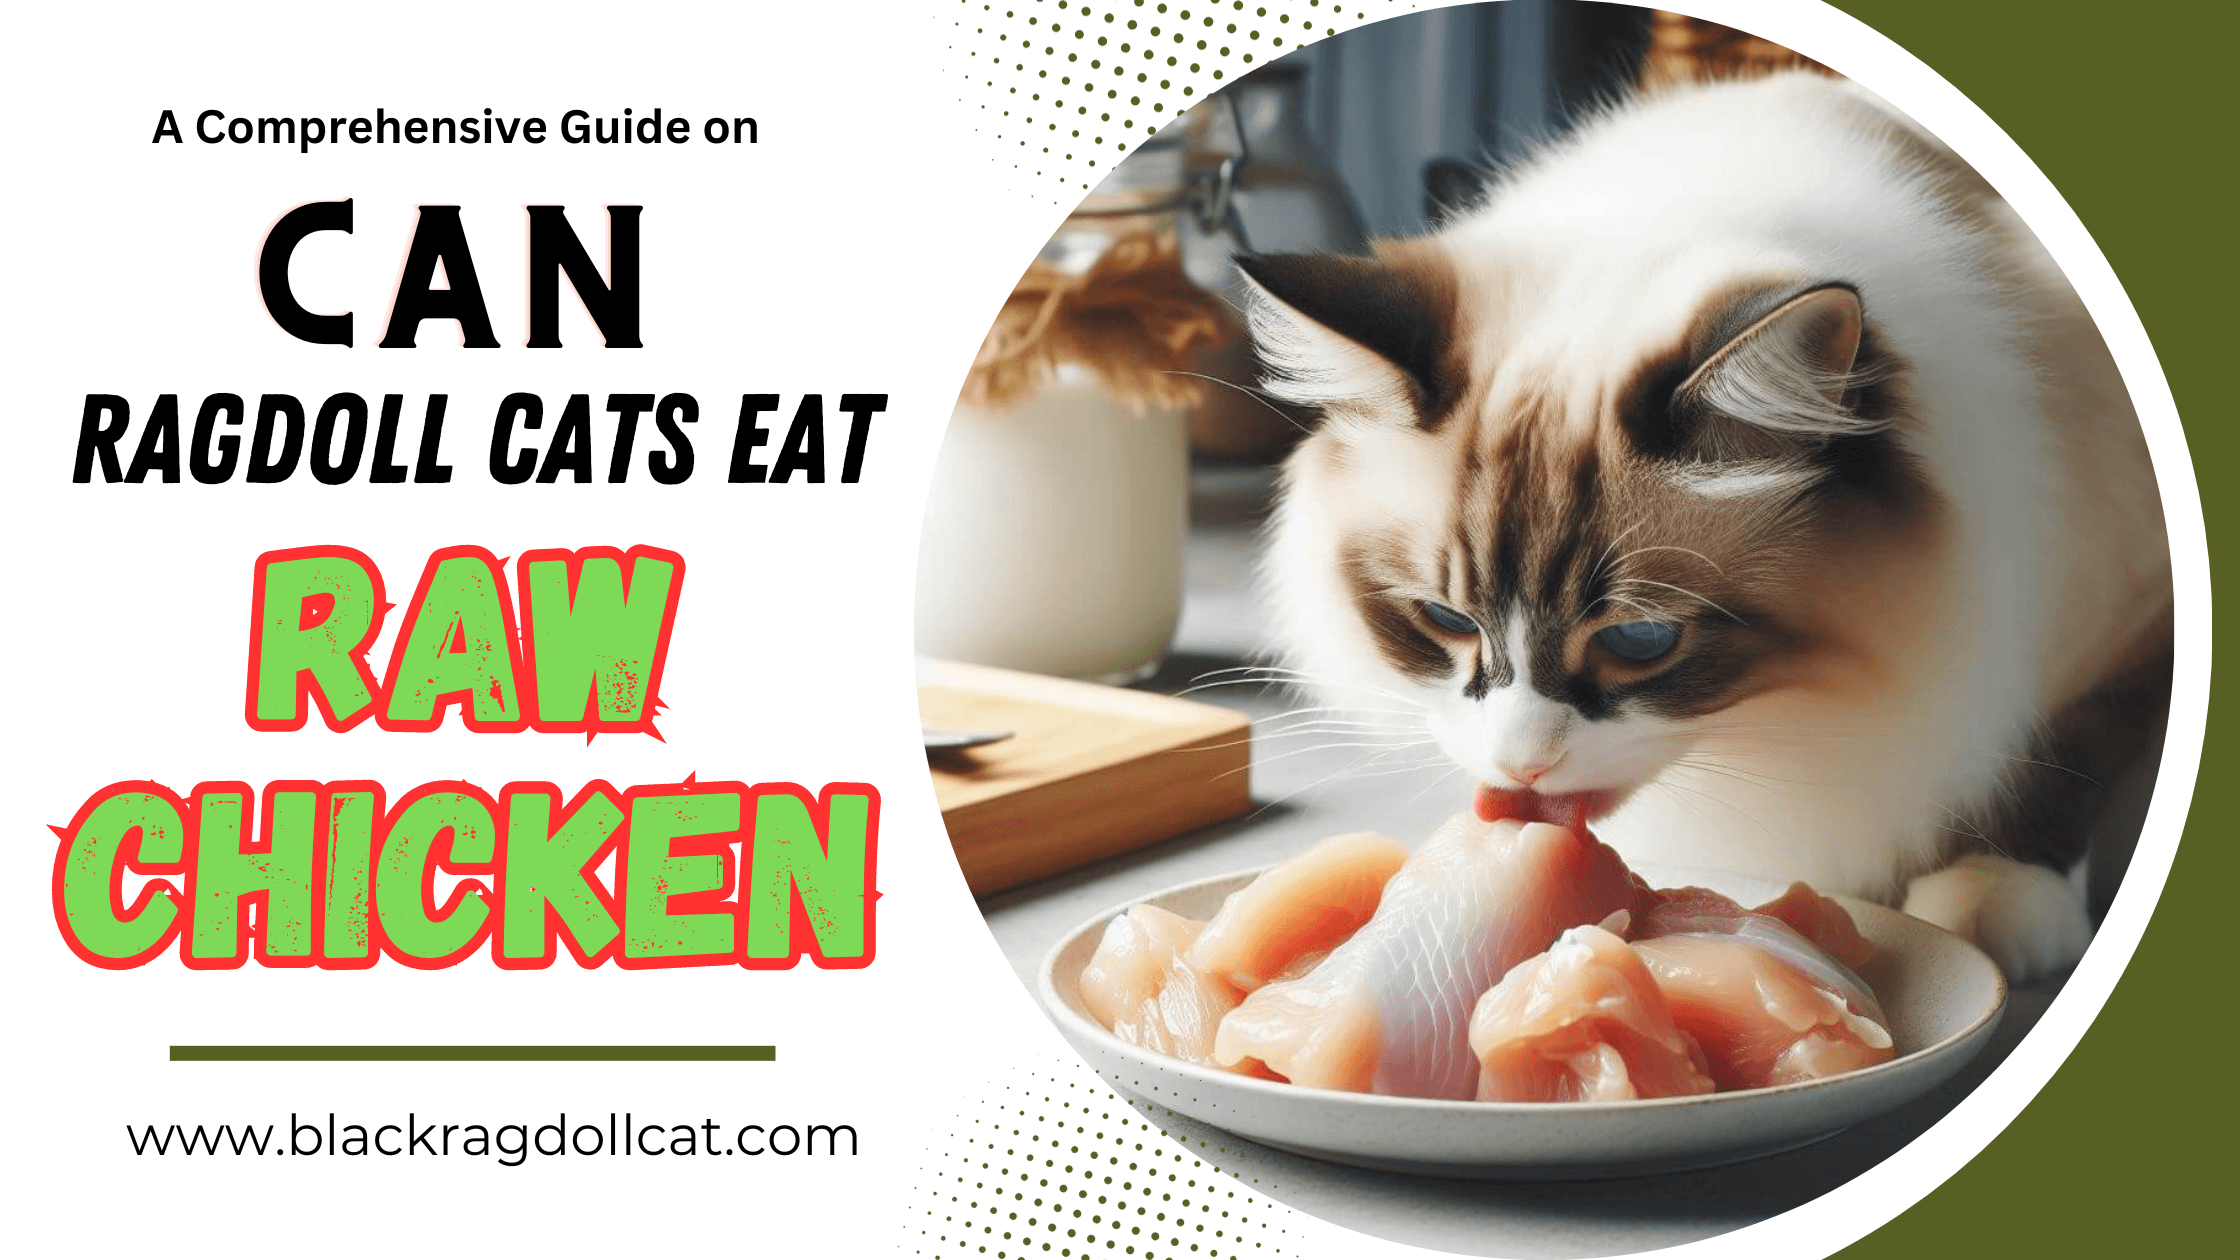 Can ragdoll cats eat raw chicken?